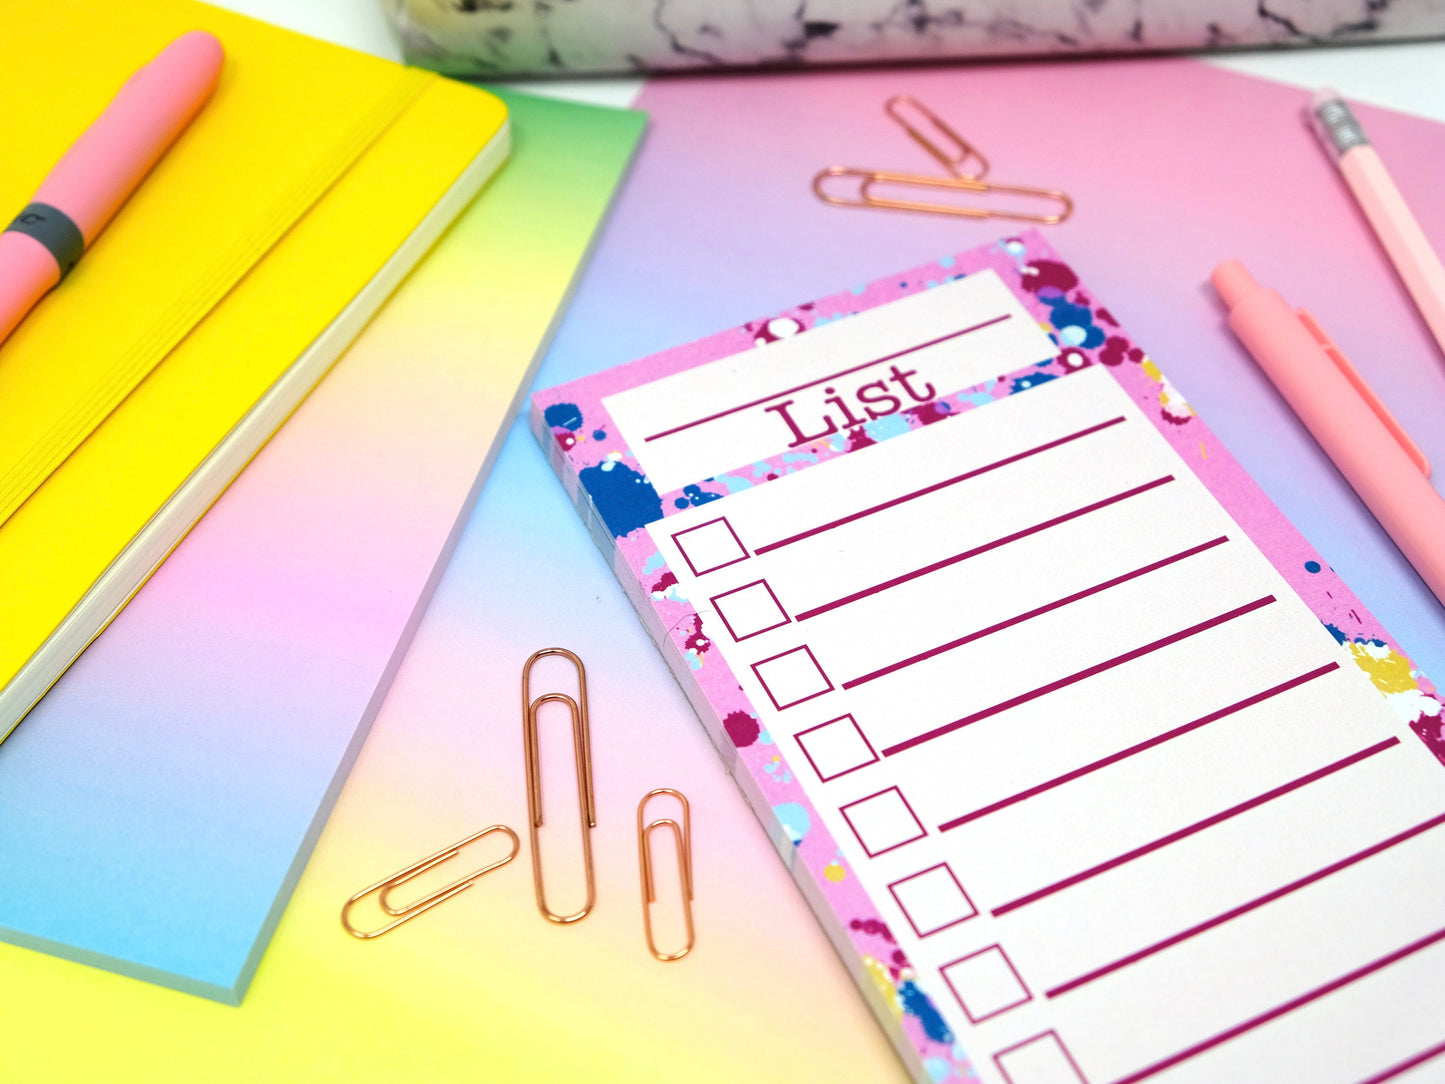 Creative Cute and Colourful List Pads - List Note Pads with 50 Tear Away Pages - To Do List Pads In 6 Colours